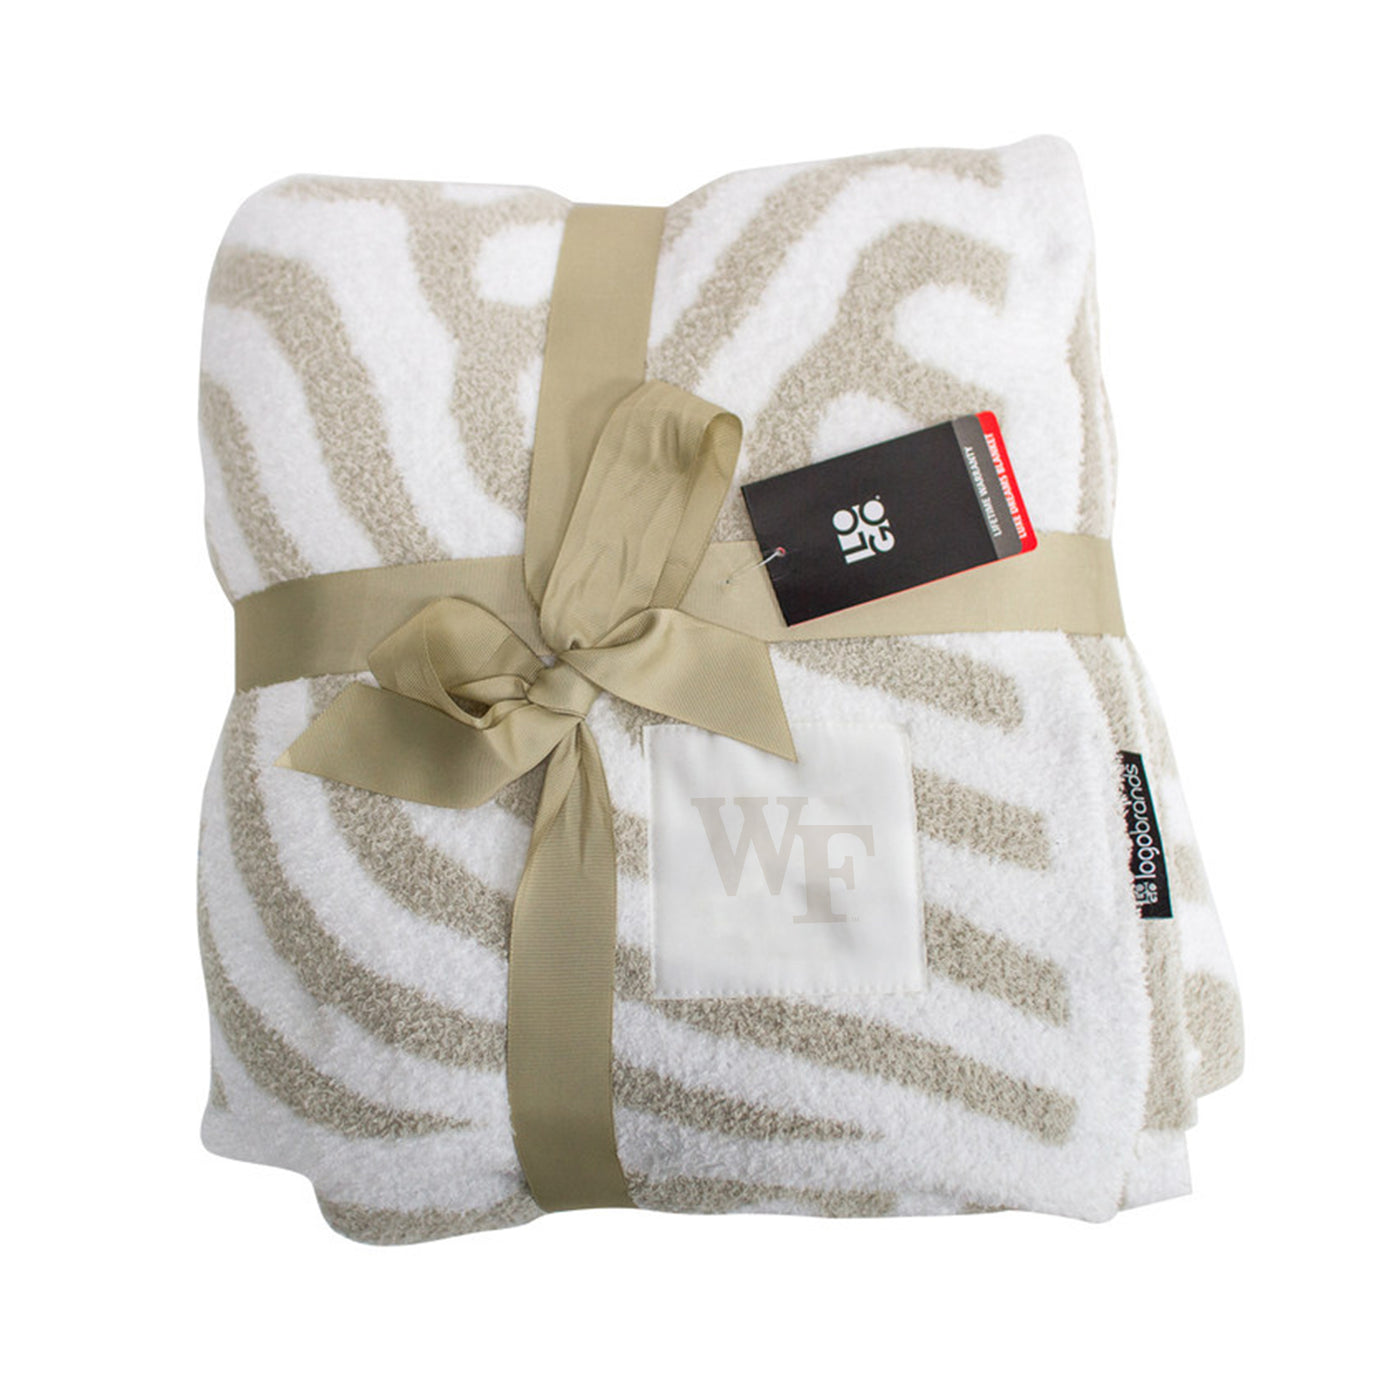 Wake Forest Luxe Dreams Throw